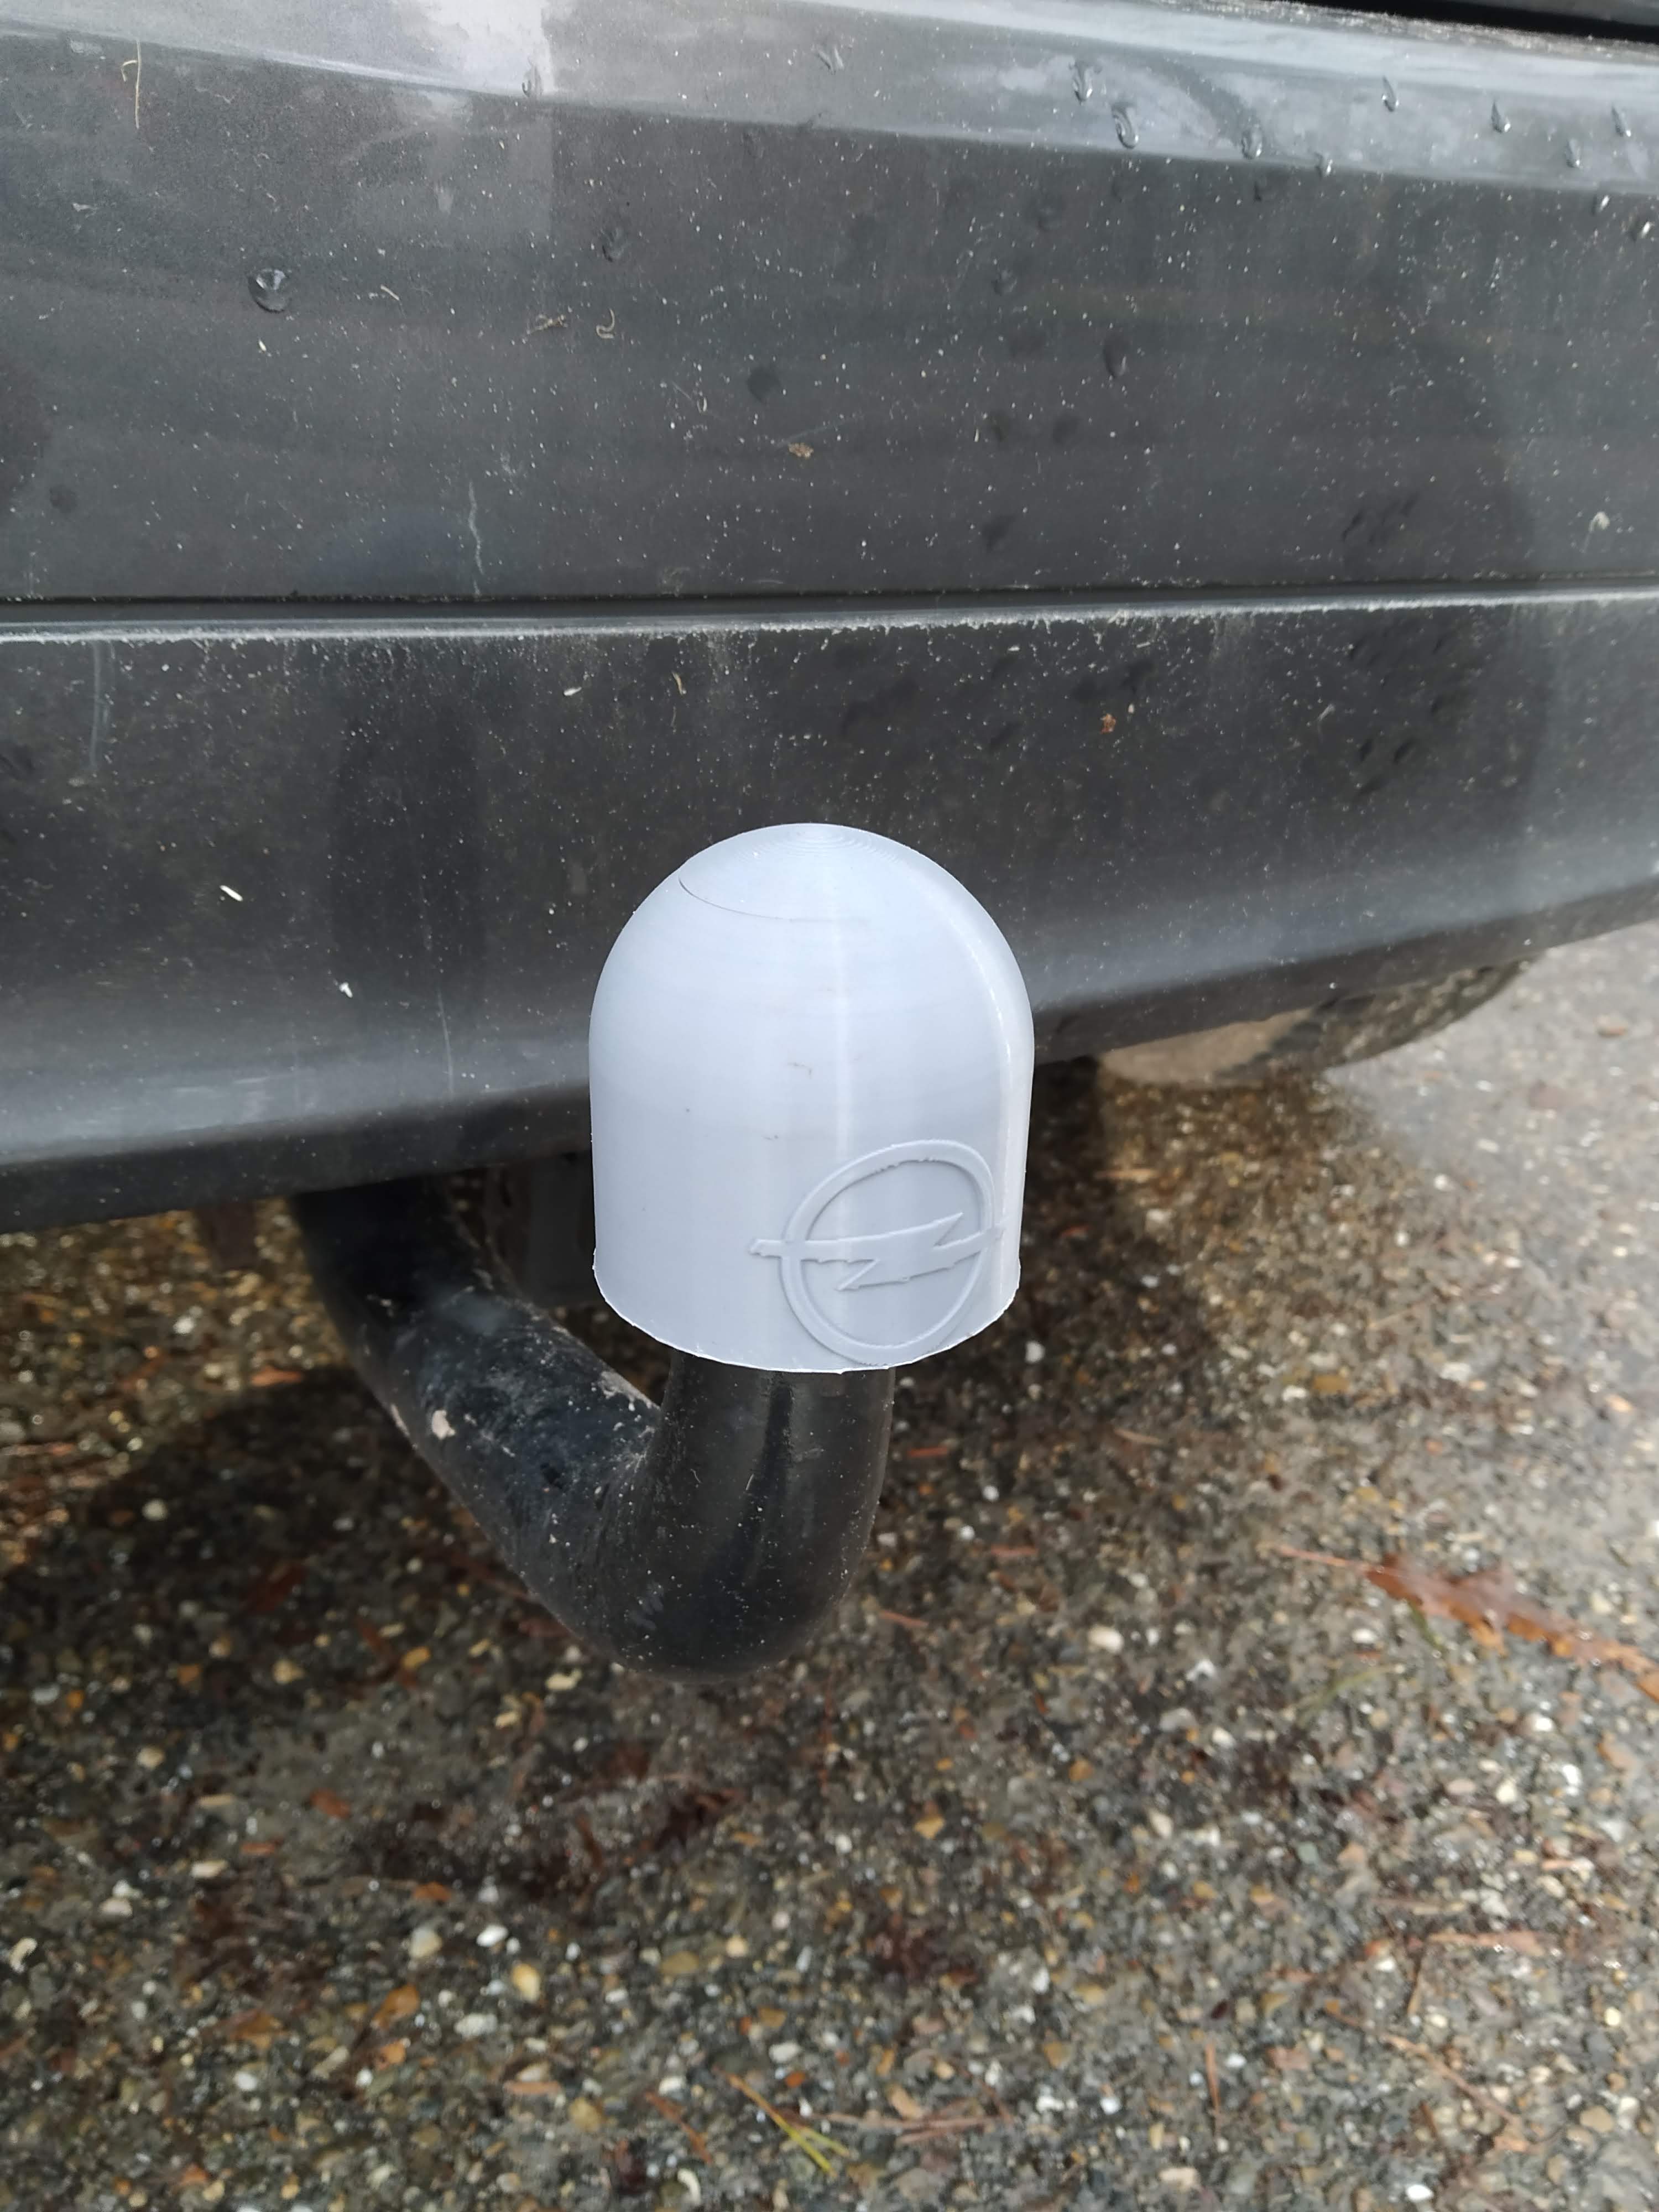 Tow ball/hitch cover with Opel Logo, 50mm.